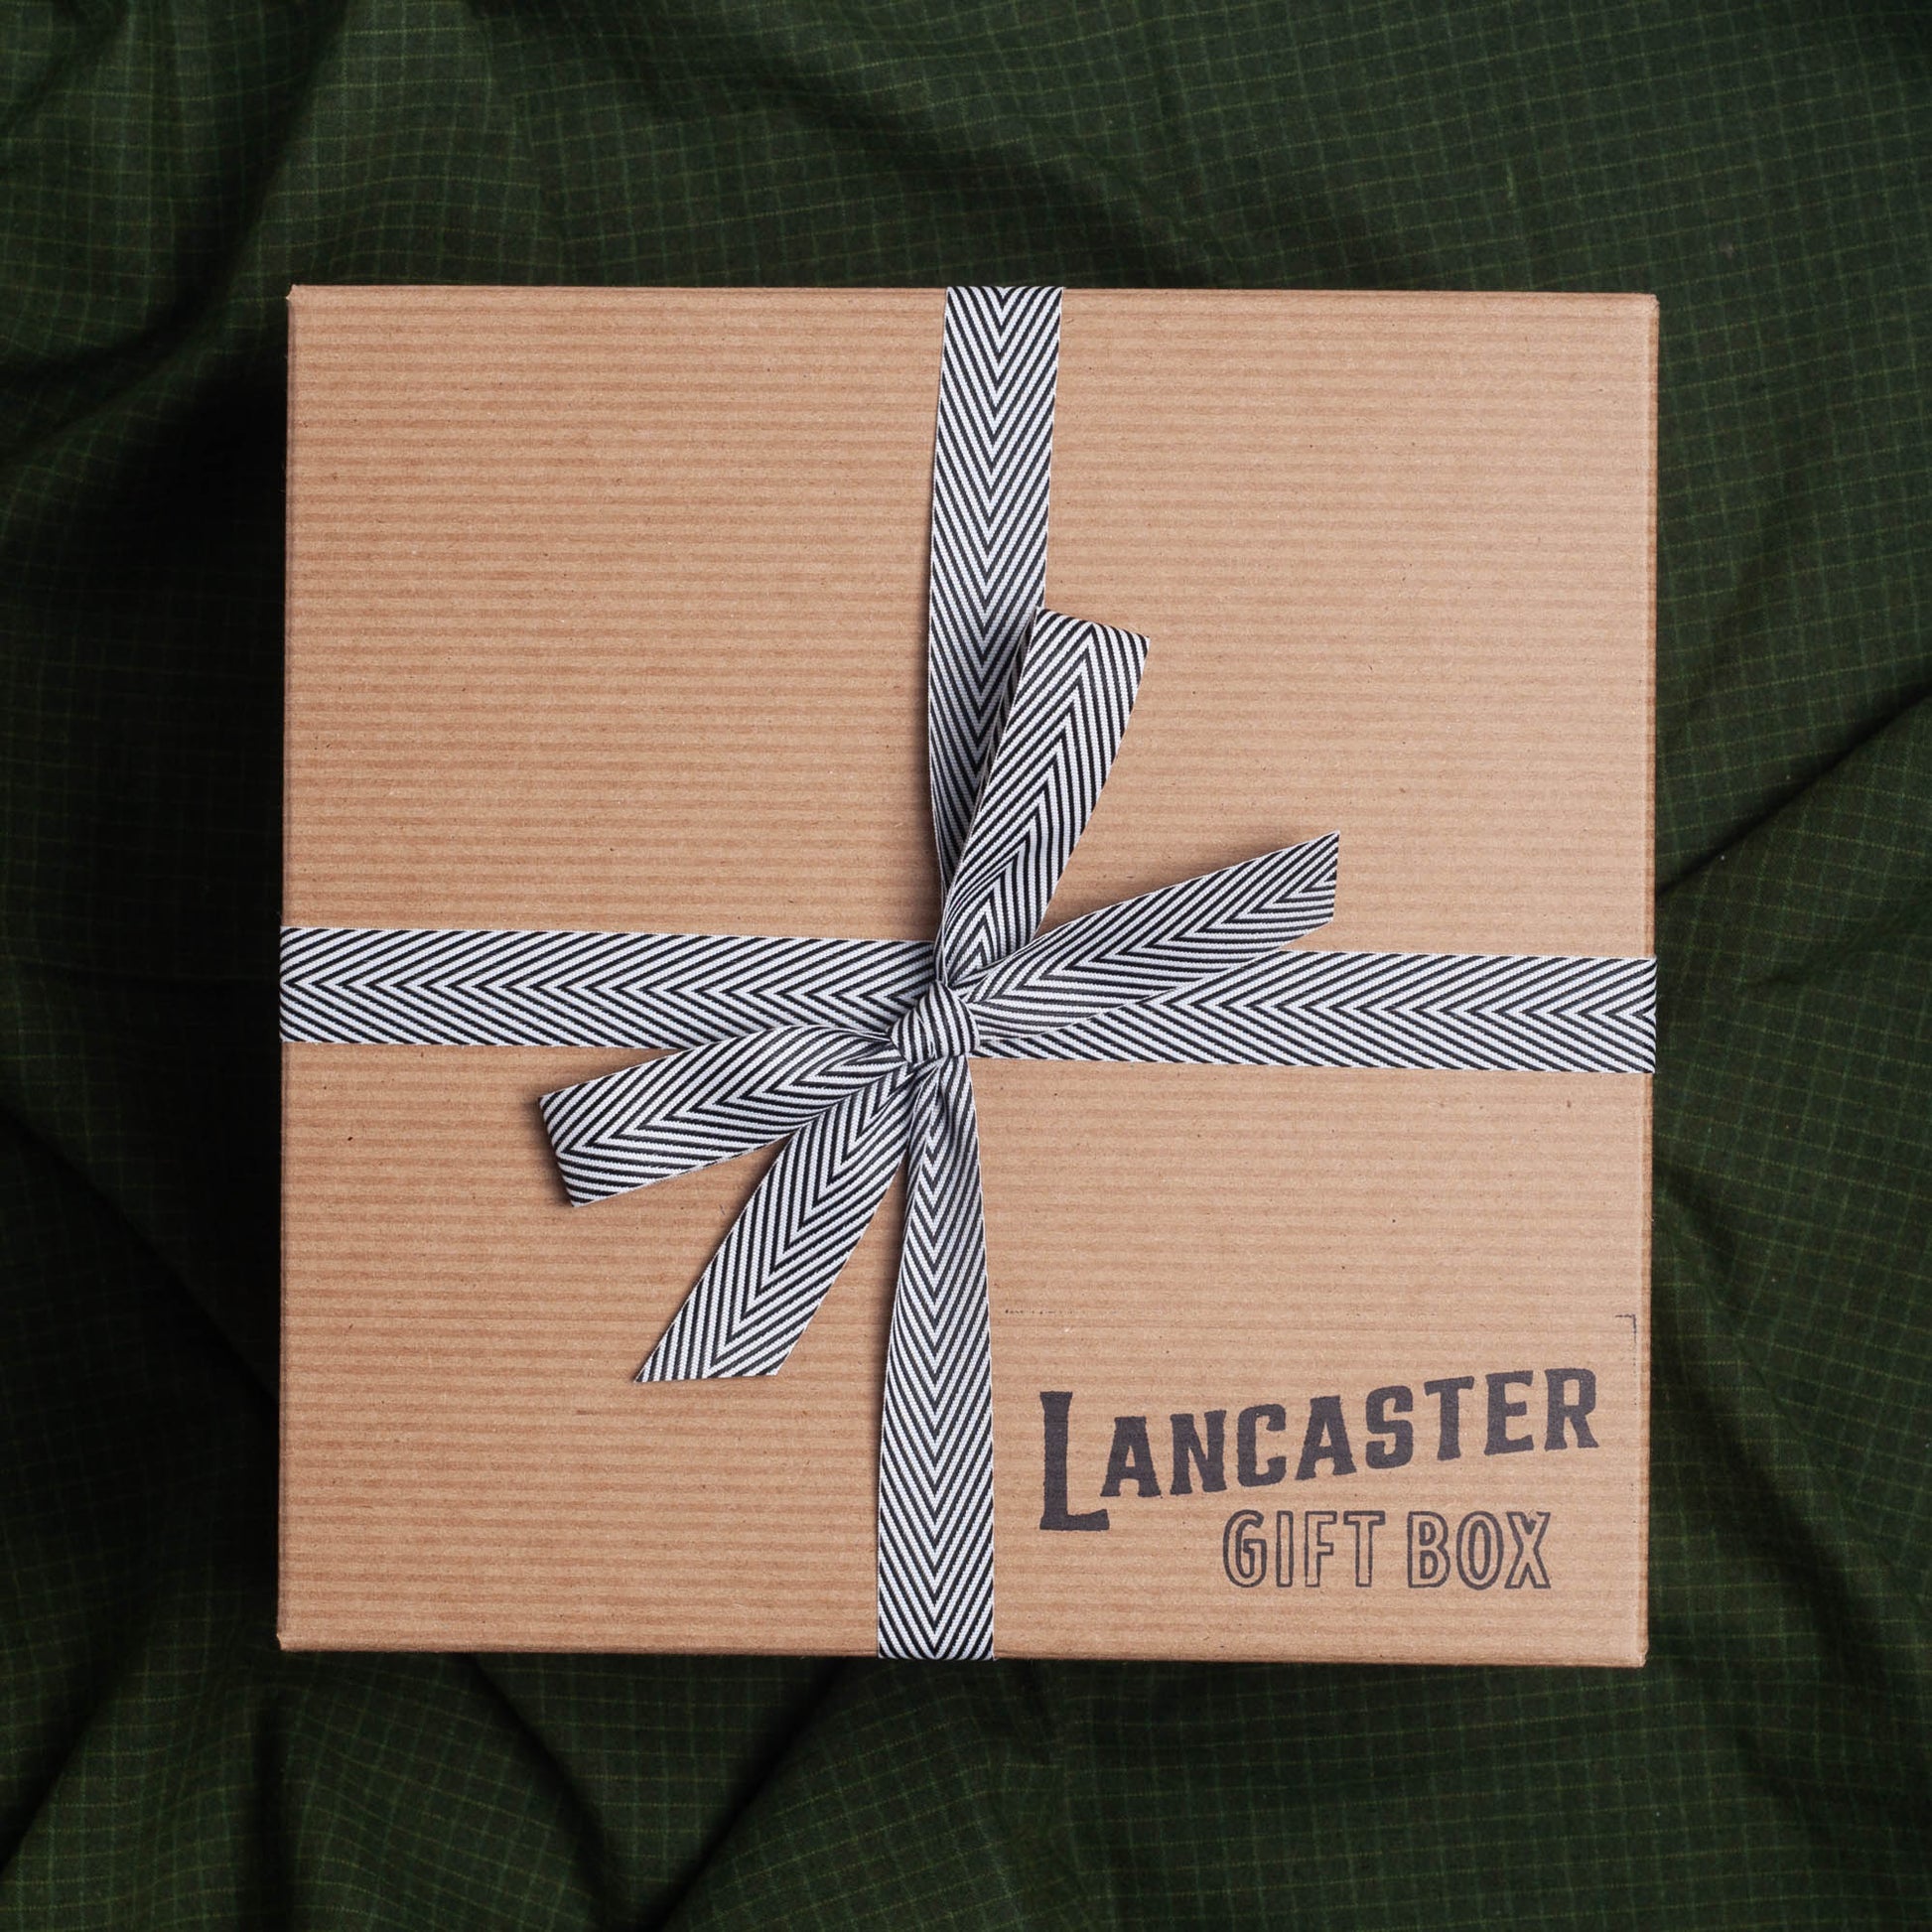 Lancaster Gift Box with black & white bow.